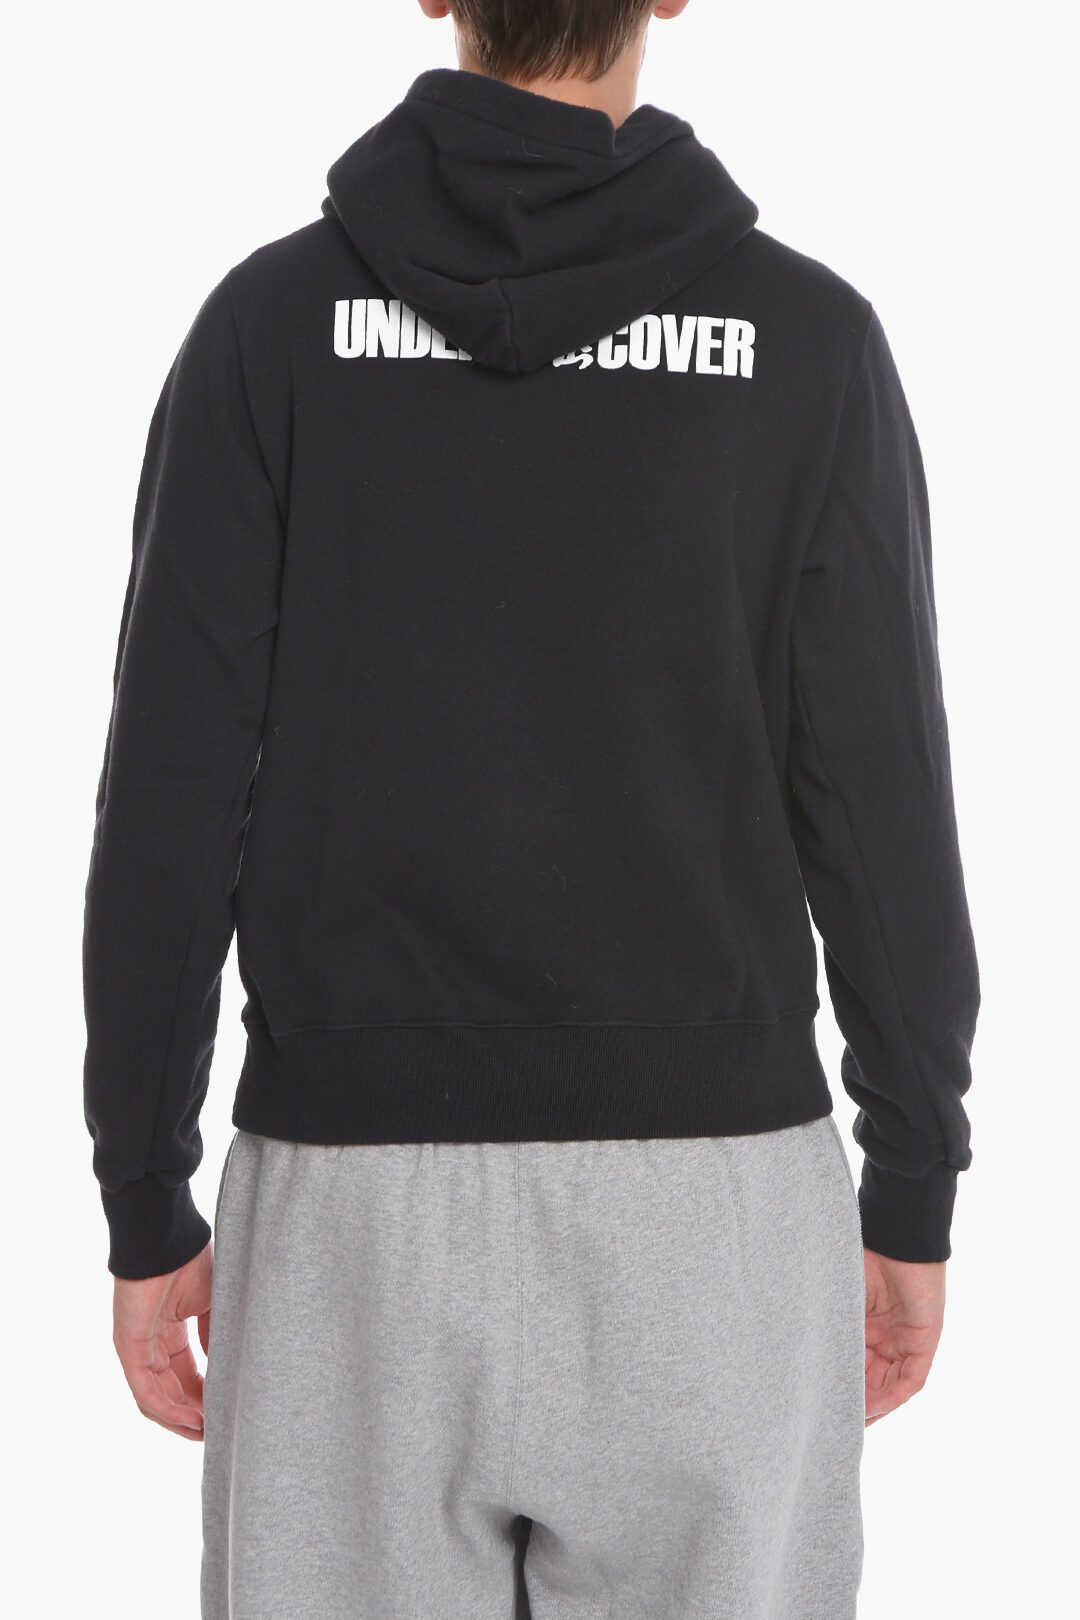 Undercover JUN TAKAHASHI Hoodie With Contrast Print men - Glamood Outlet